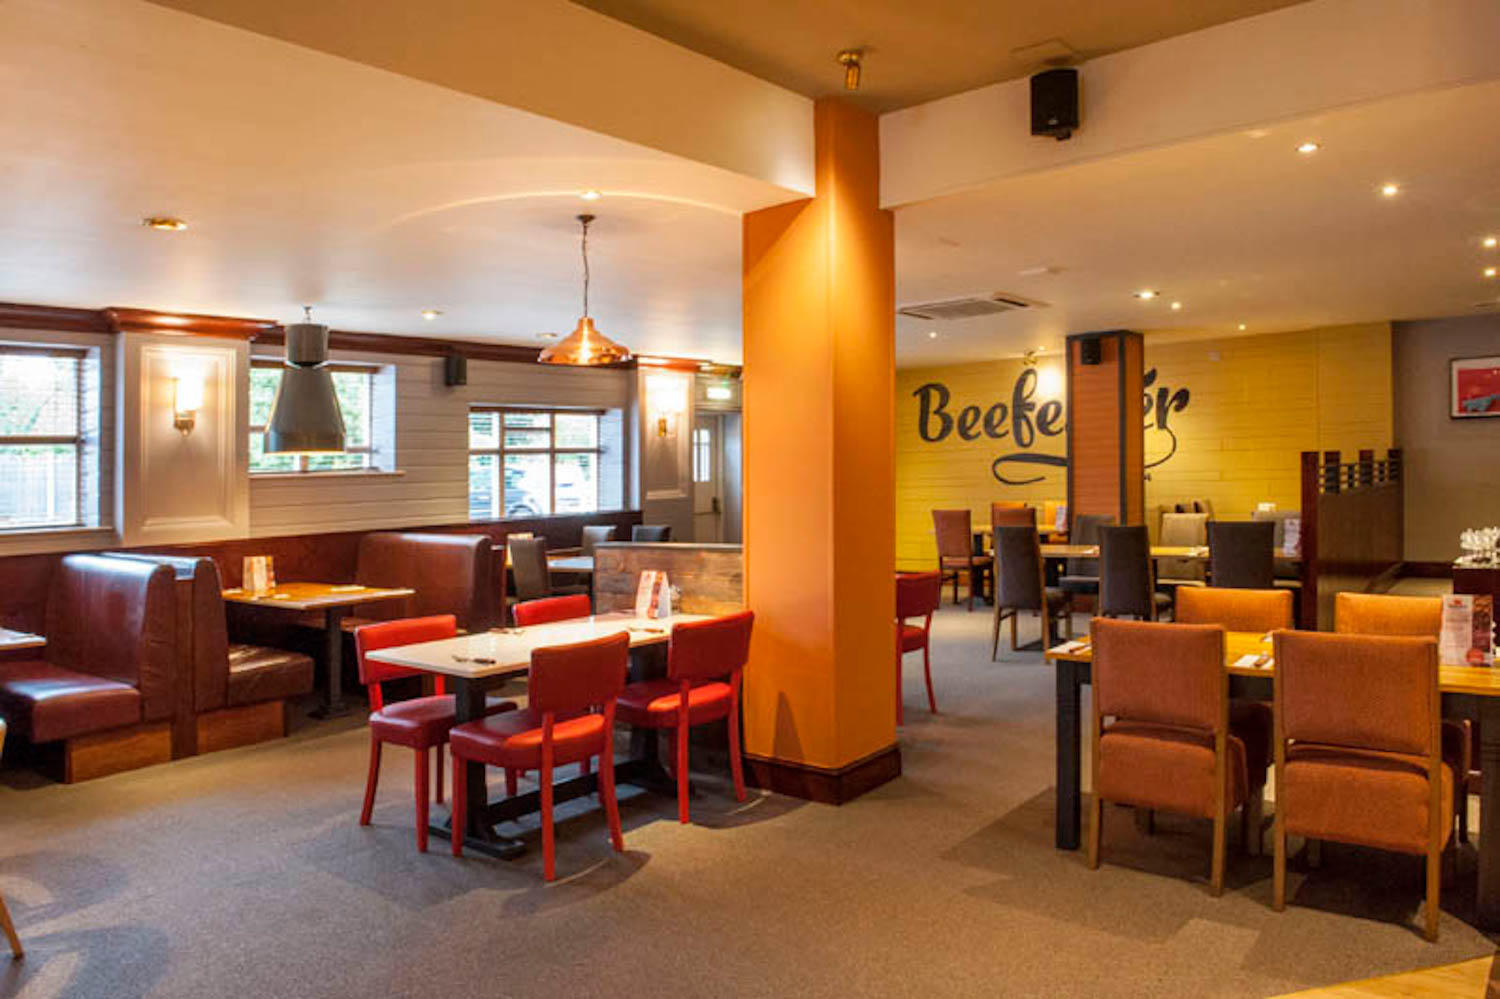 Beefeater restaurant interior Solihull (Hockley Heath, M42) hotel Solihull 03333 218869